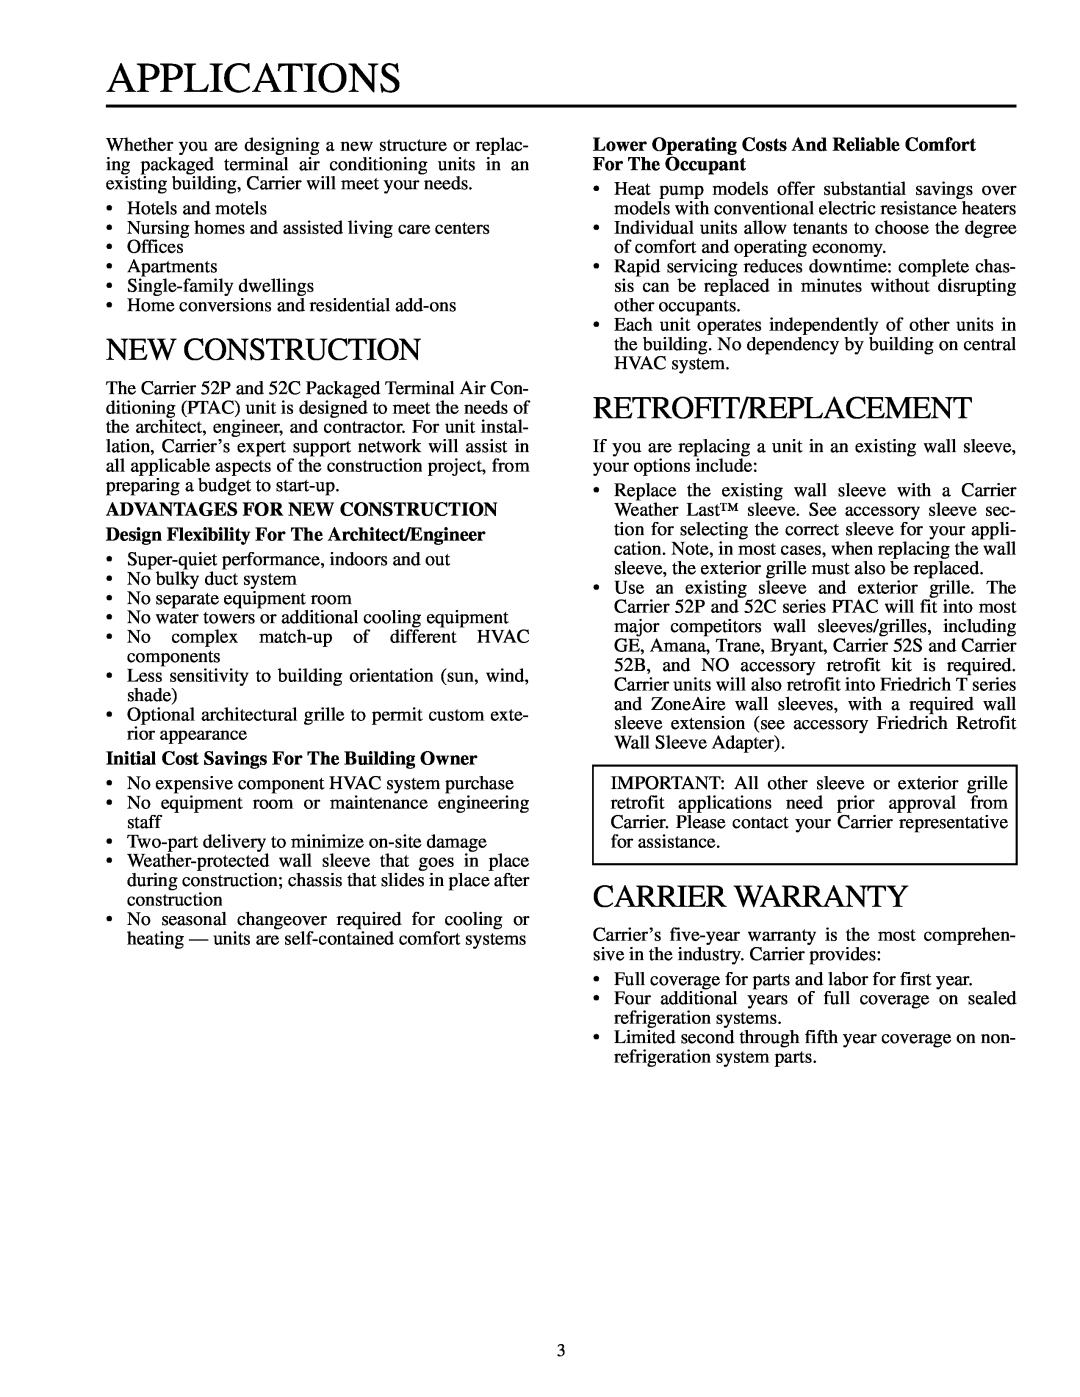 Carrier 592-085 warranty Applications, New Construction, Retrofit/Replacement, Carrier Warranty 